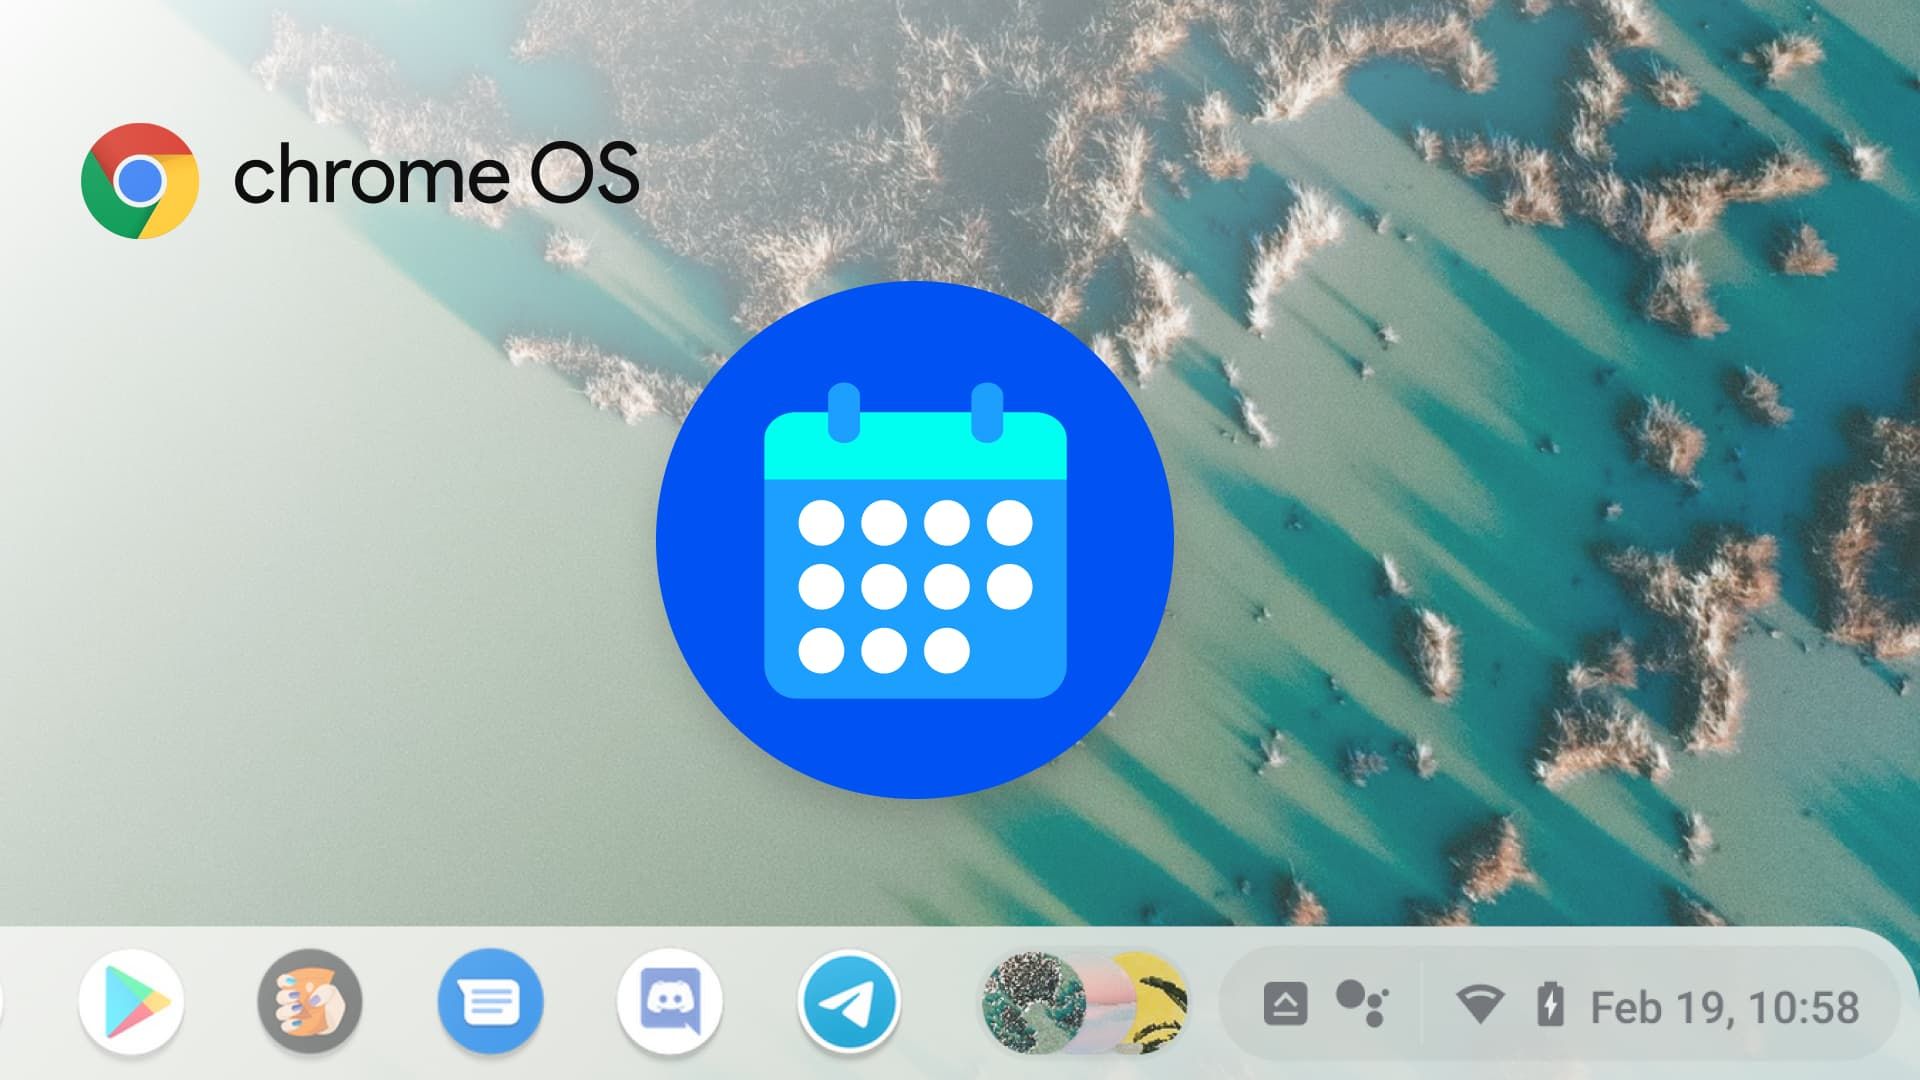 Google #39 s Chrome OS Beta Community is gearing up for launch